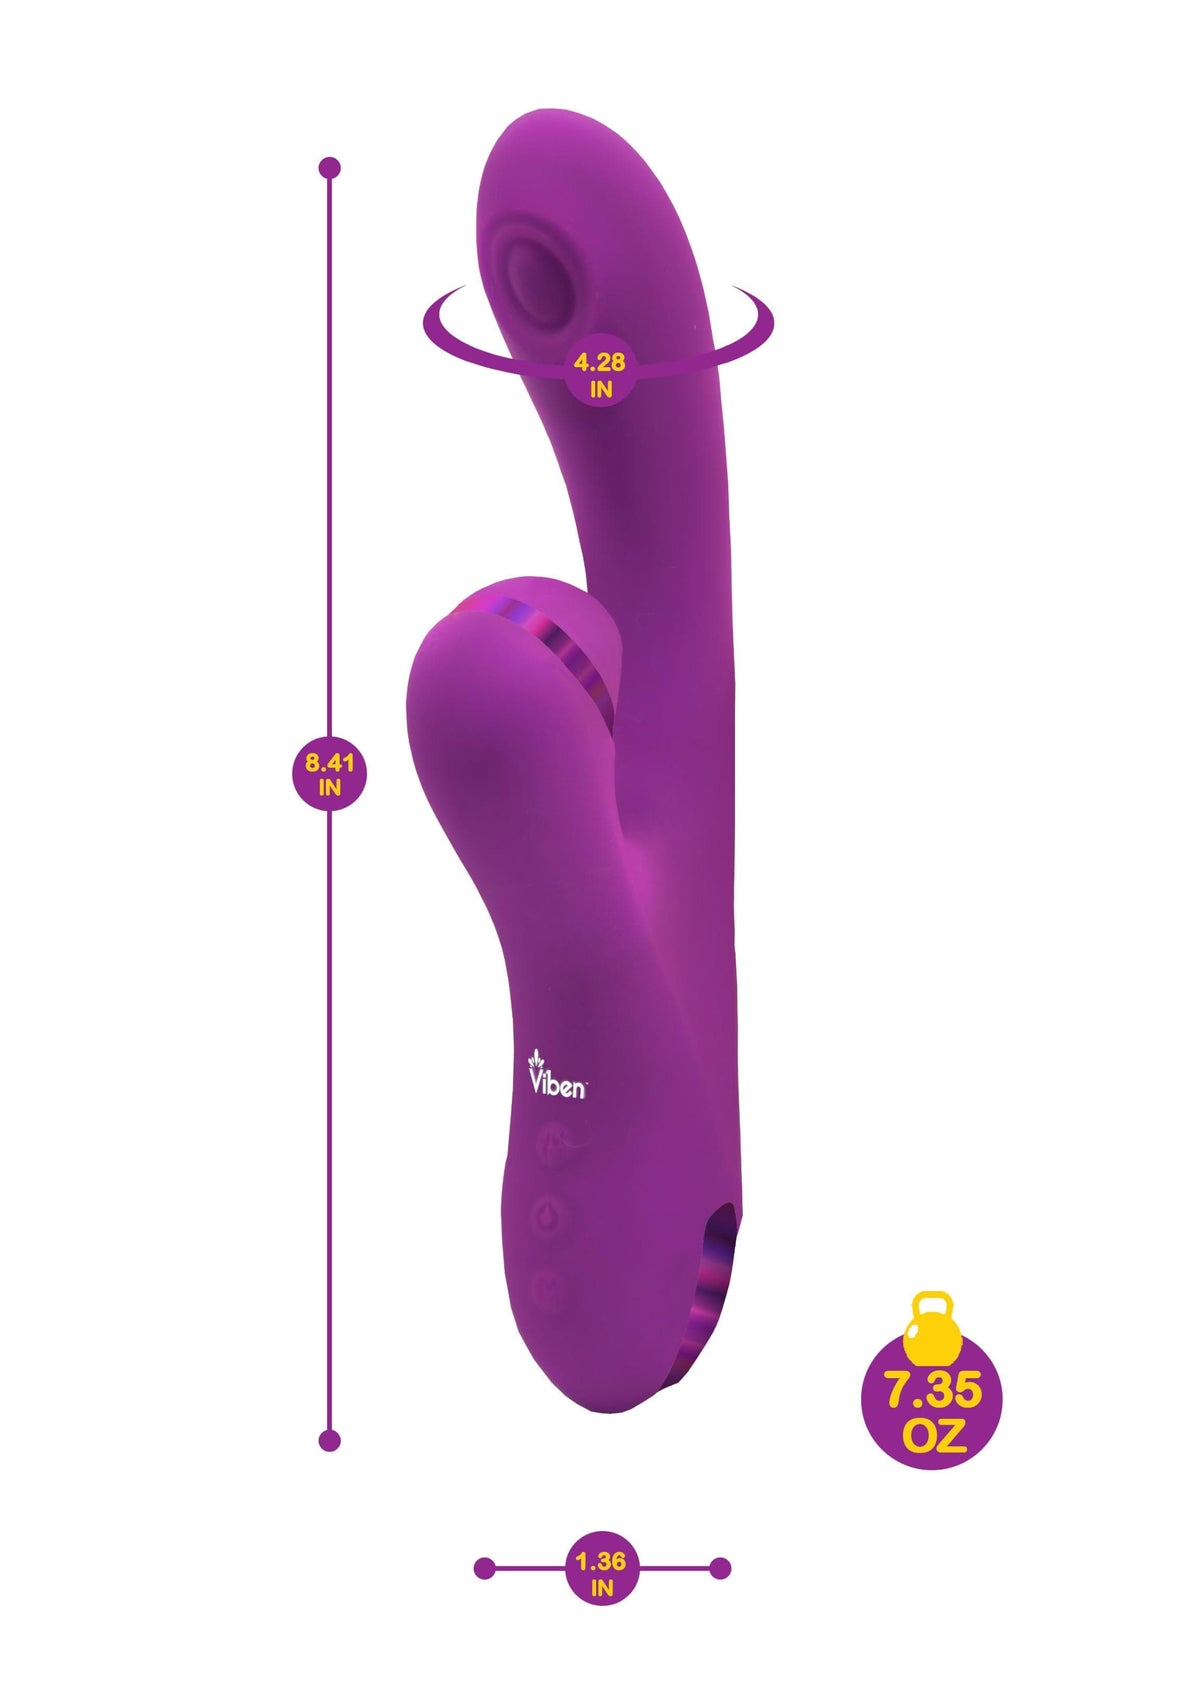 dazzle berry rechargeable thumping and suction rabbit